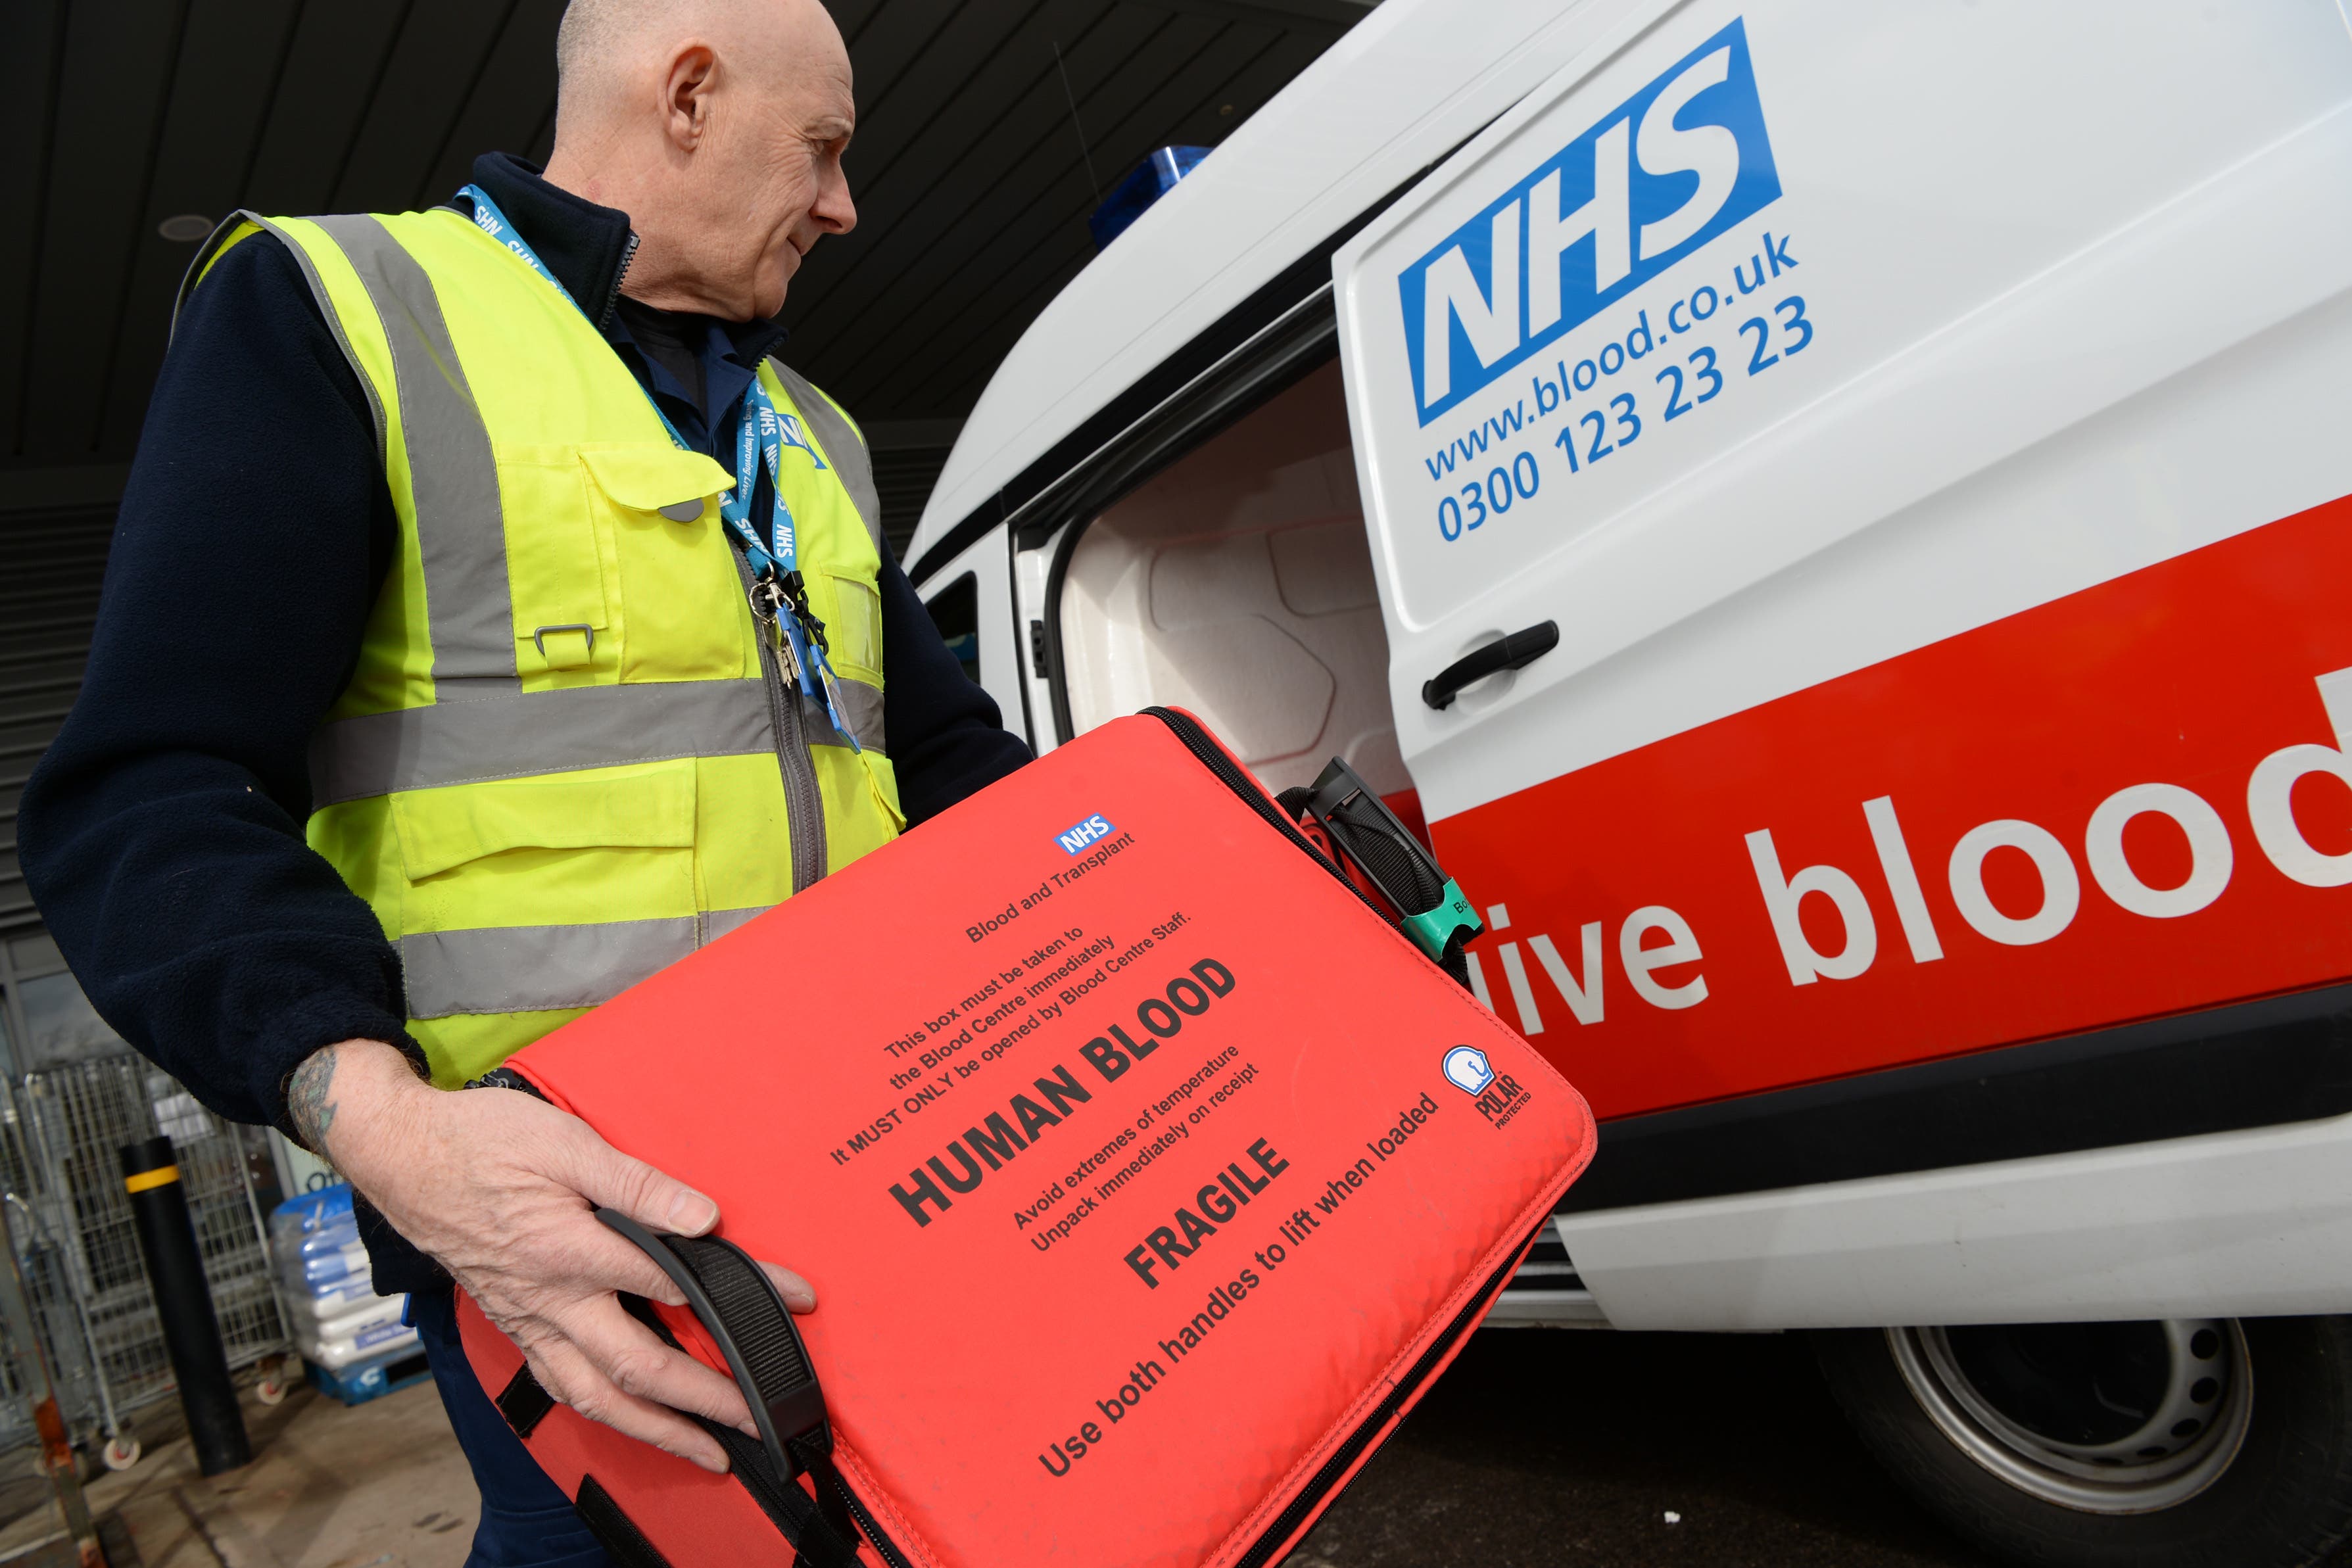 An urgent blood drive has also been launched across the country following the attack